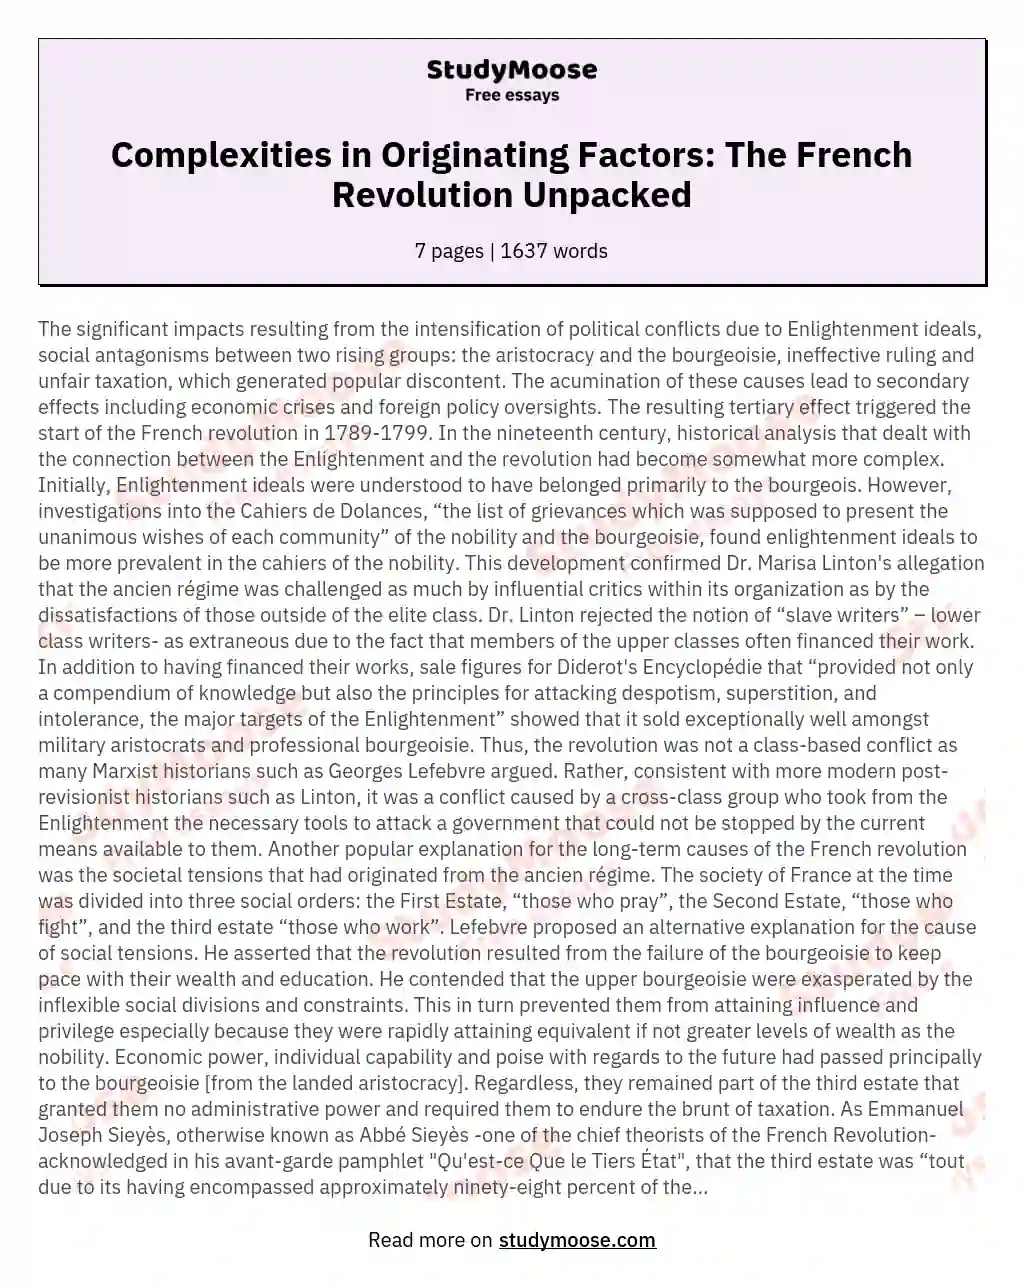 Complexities in Originating Factors: The French Revolution Unpacked essay